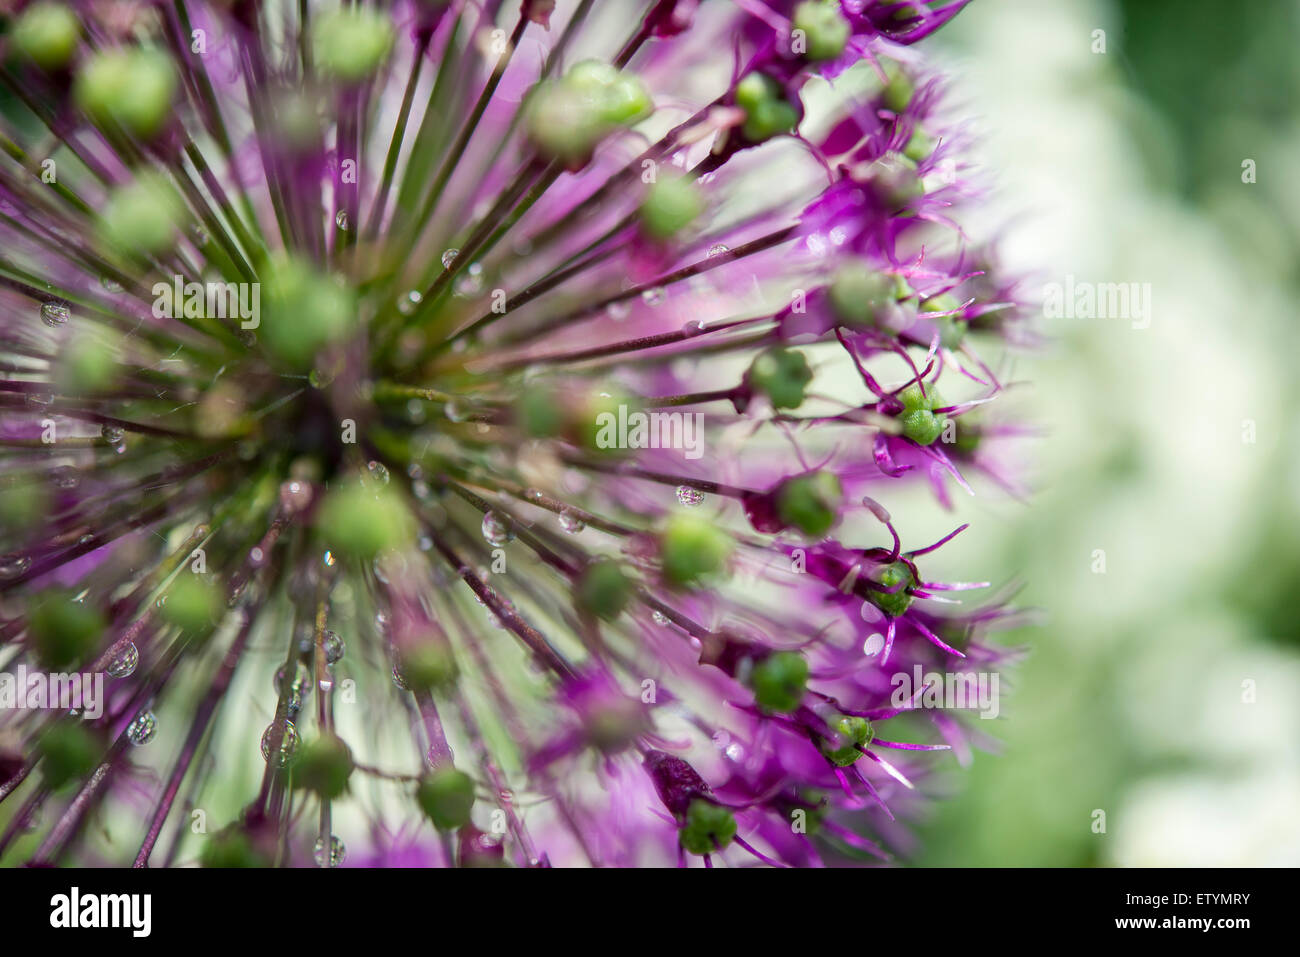 Close up of an Allium flower head with an explosion of stems covered in rain drops. Stock Photo